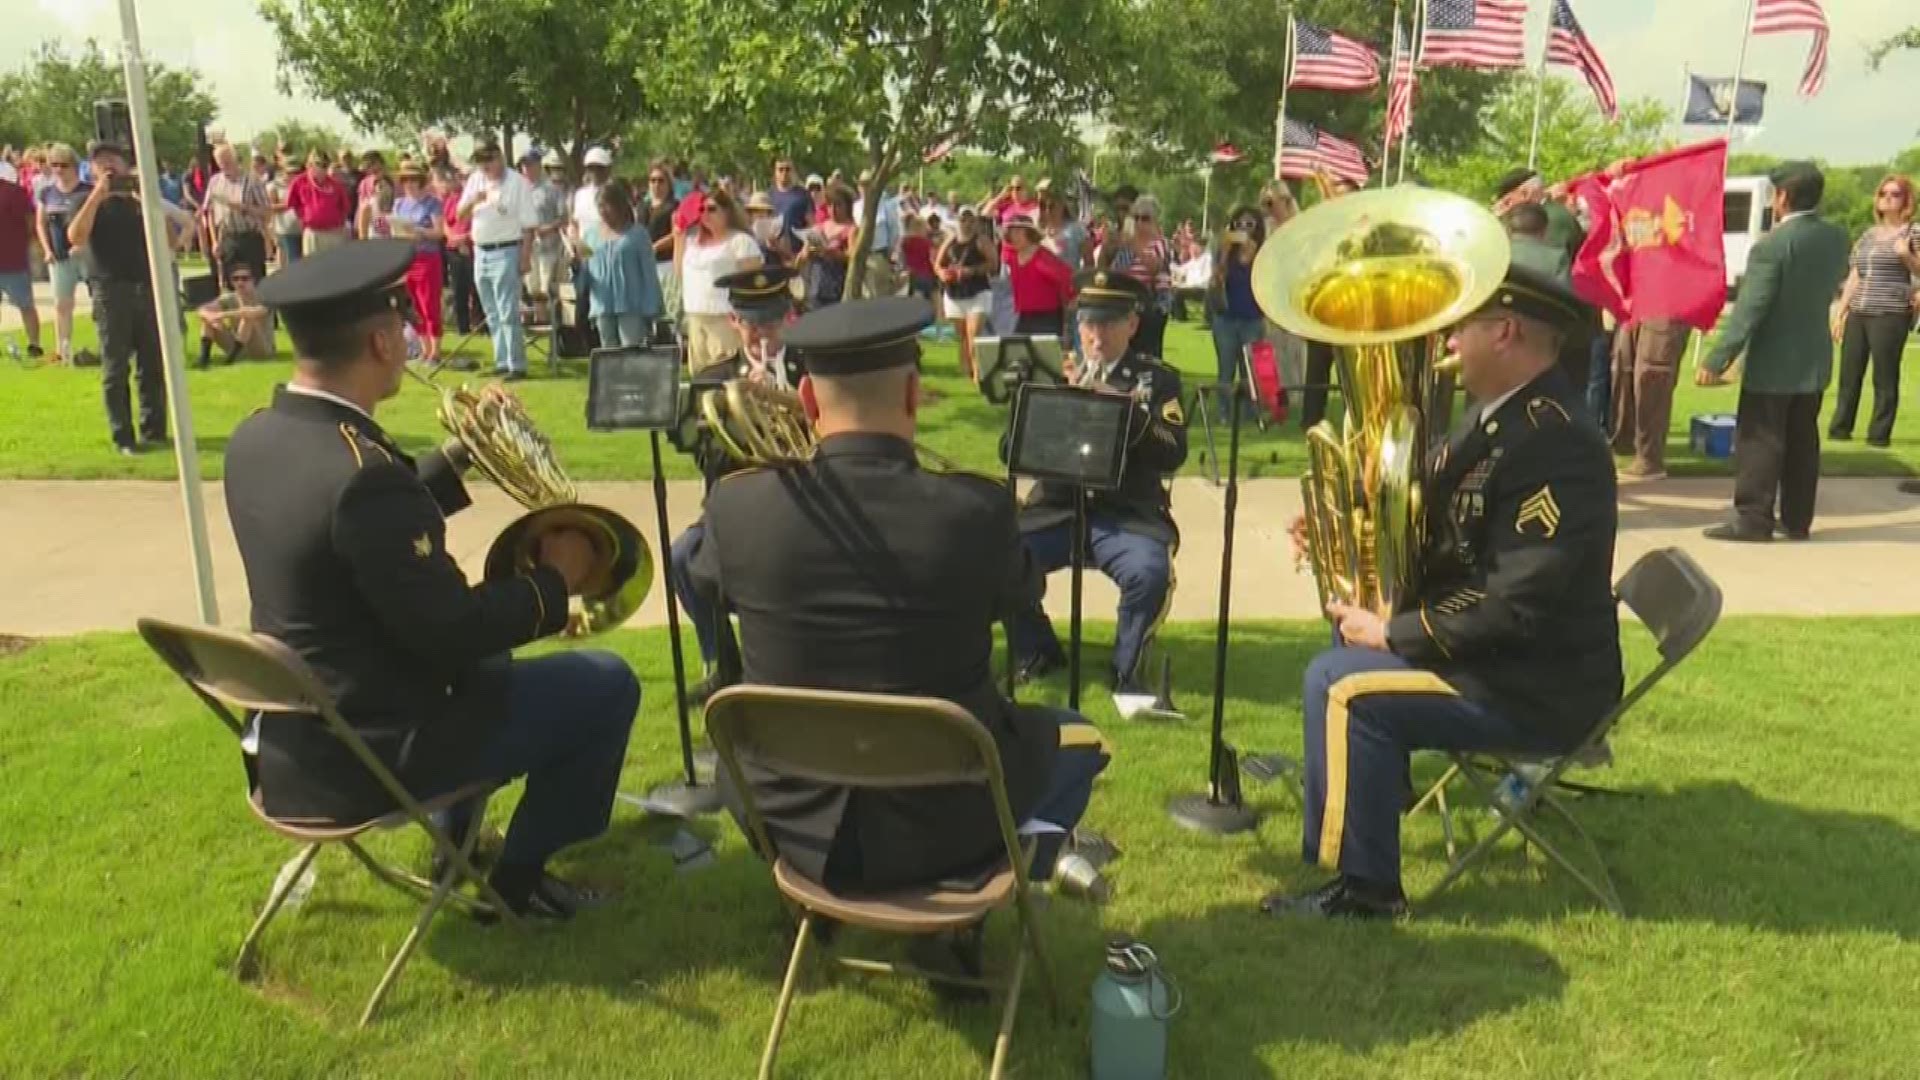 In San Antonio, under a blue sky, hundreds of patriotic people turned out for a stirring ceremony at Fort Sam Houston National Cemetery. They came to remember and to say thanks on behalf of all those who gave their lives for freedom.